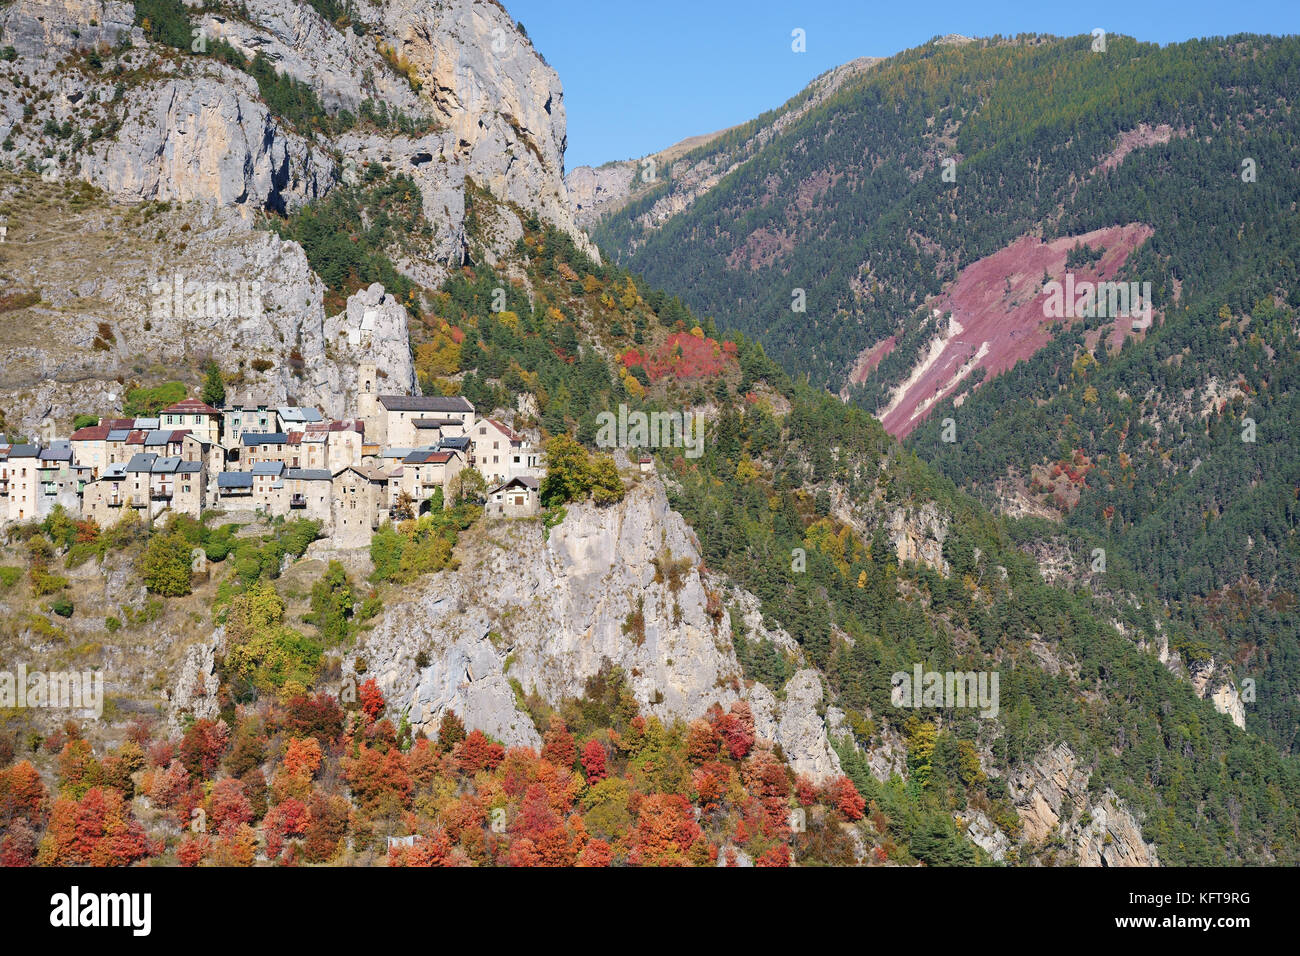 Medieval village in a landscape of cliffs and forest with autumnal colors. Roubion, French Riviera's hinterland, Alpes-Maritimes, France. Stock Photo